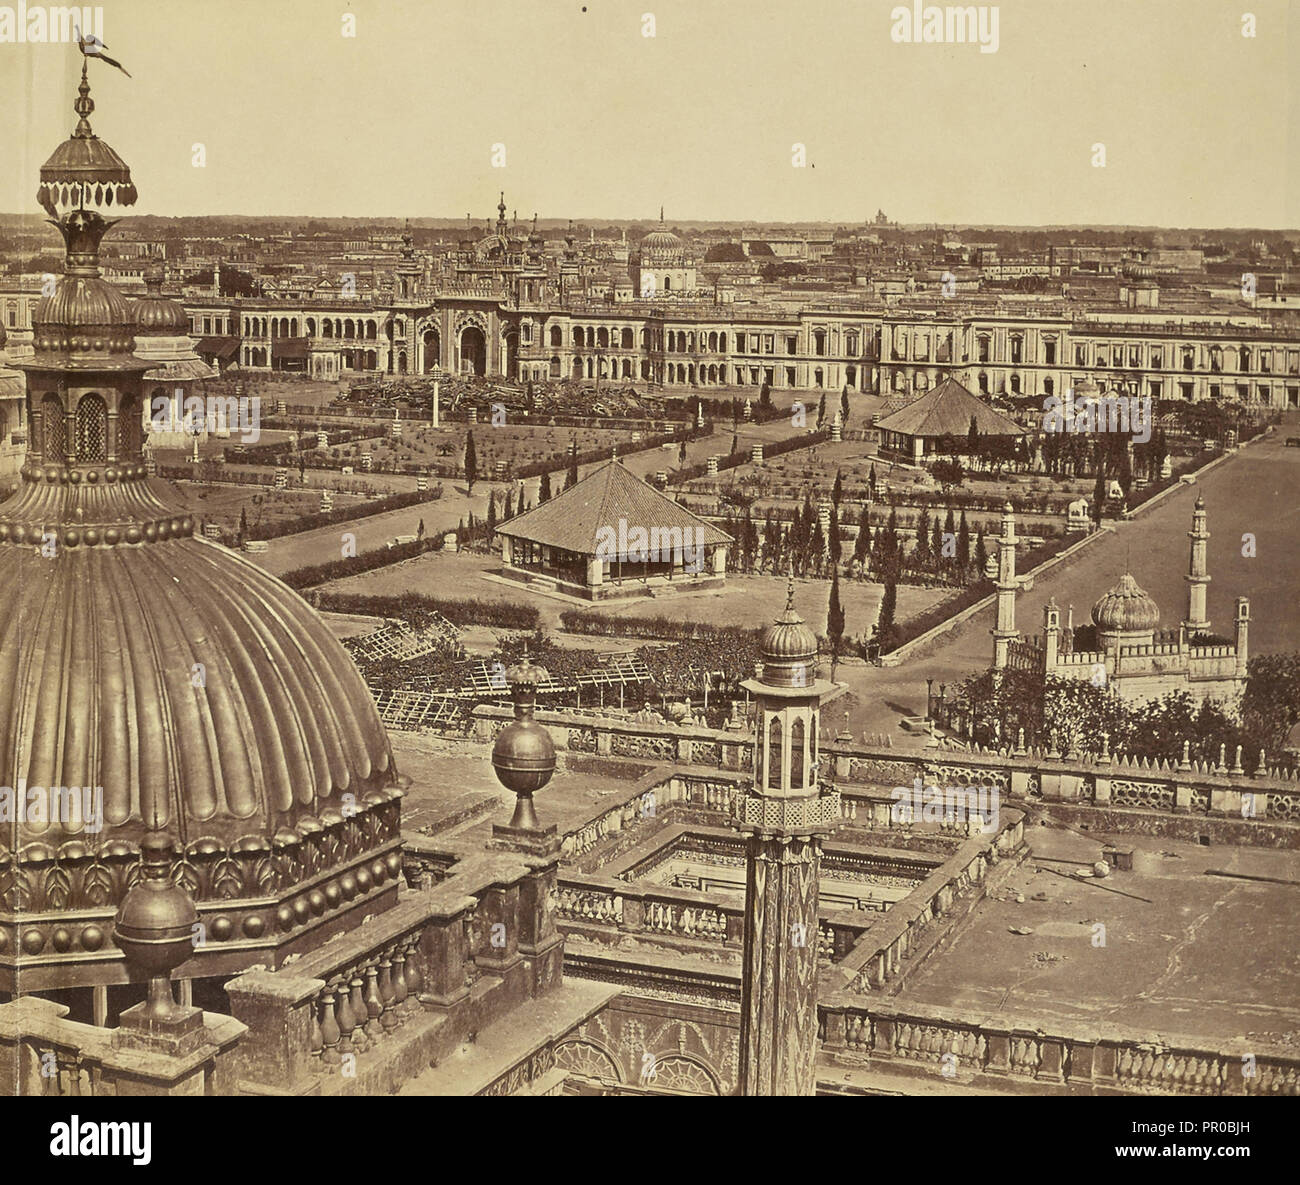 Panorama of Lucknow: View of Devastation Wrought by Lucknow Massacre; Felice Beato, 1832 - 1909, India Stock Photo